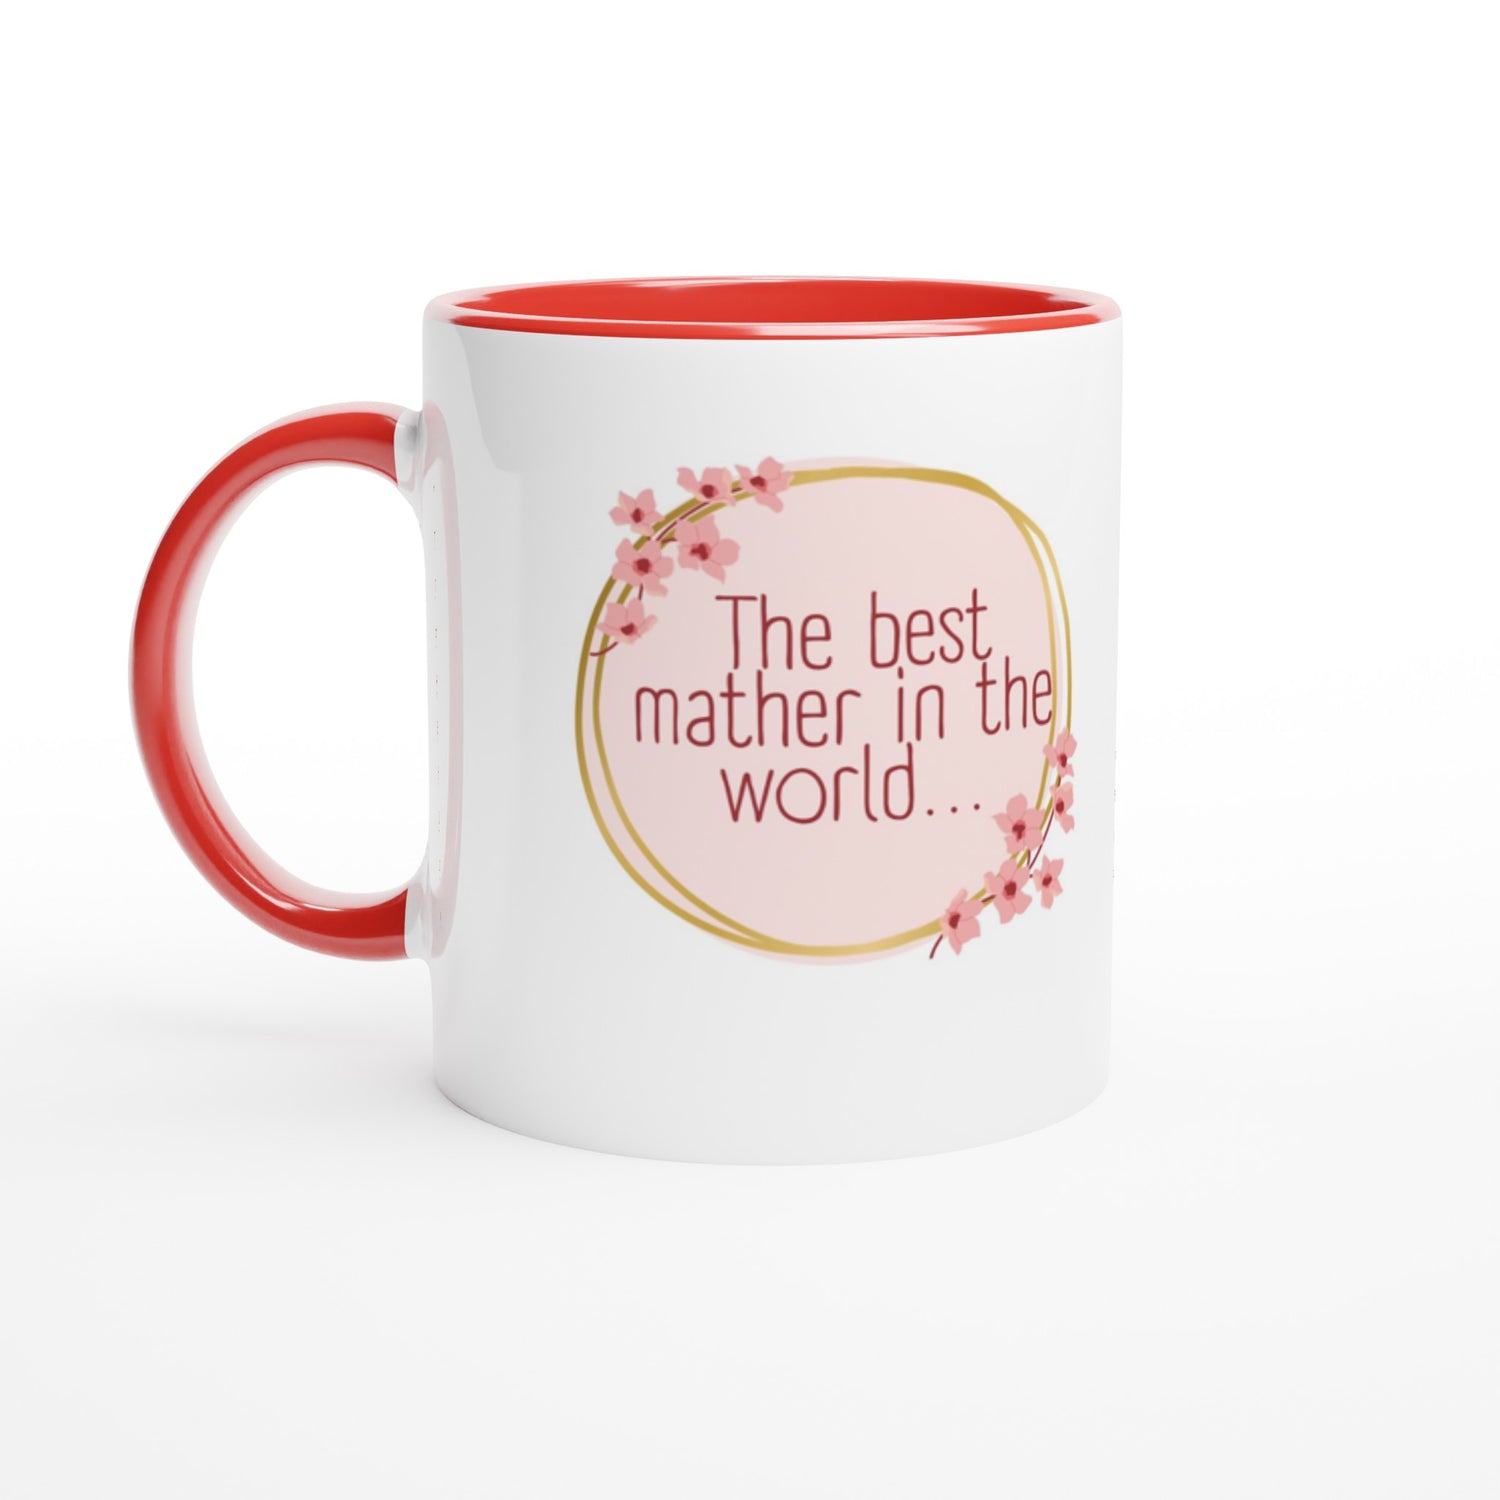 Mugs for parents